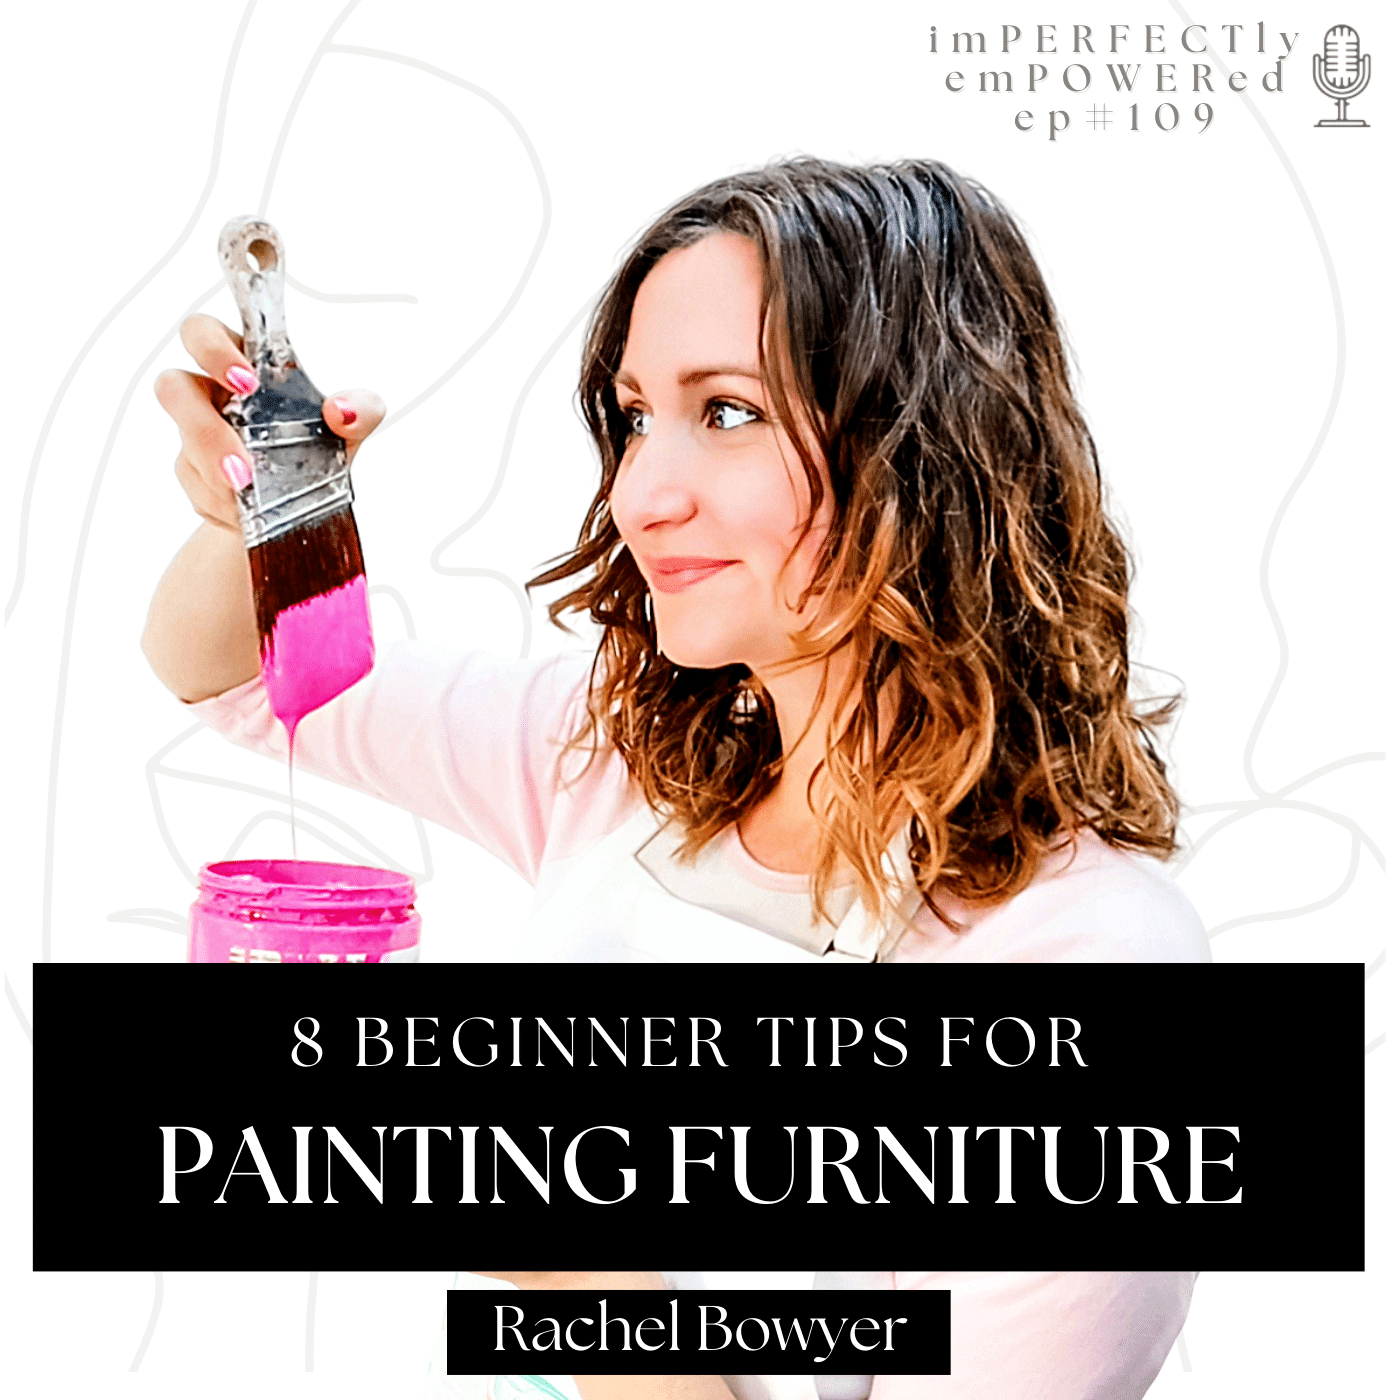 Beginner Tips for Painting Furniture (my imPERFECTly emPOWERed podcast episode)